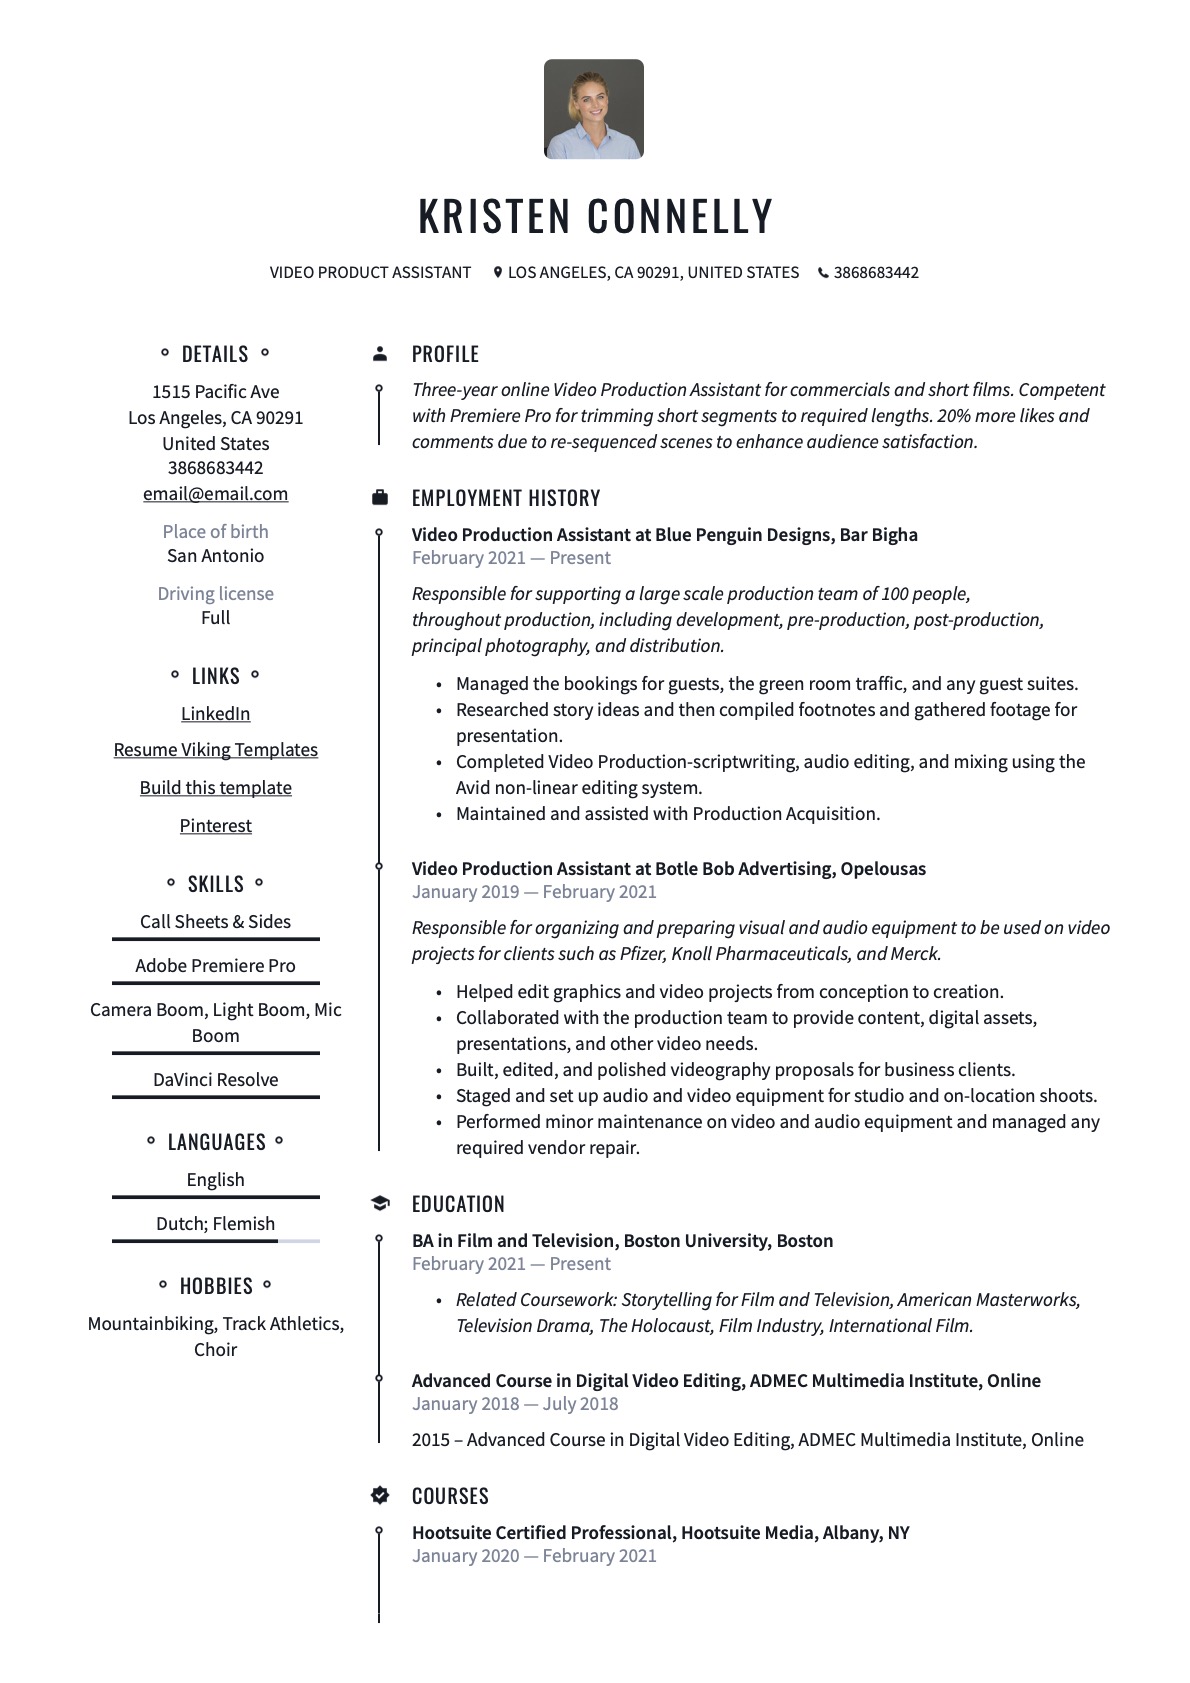 Professional Video Production Assistant Resume Example